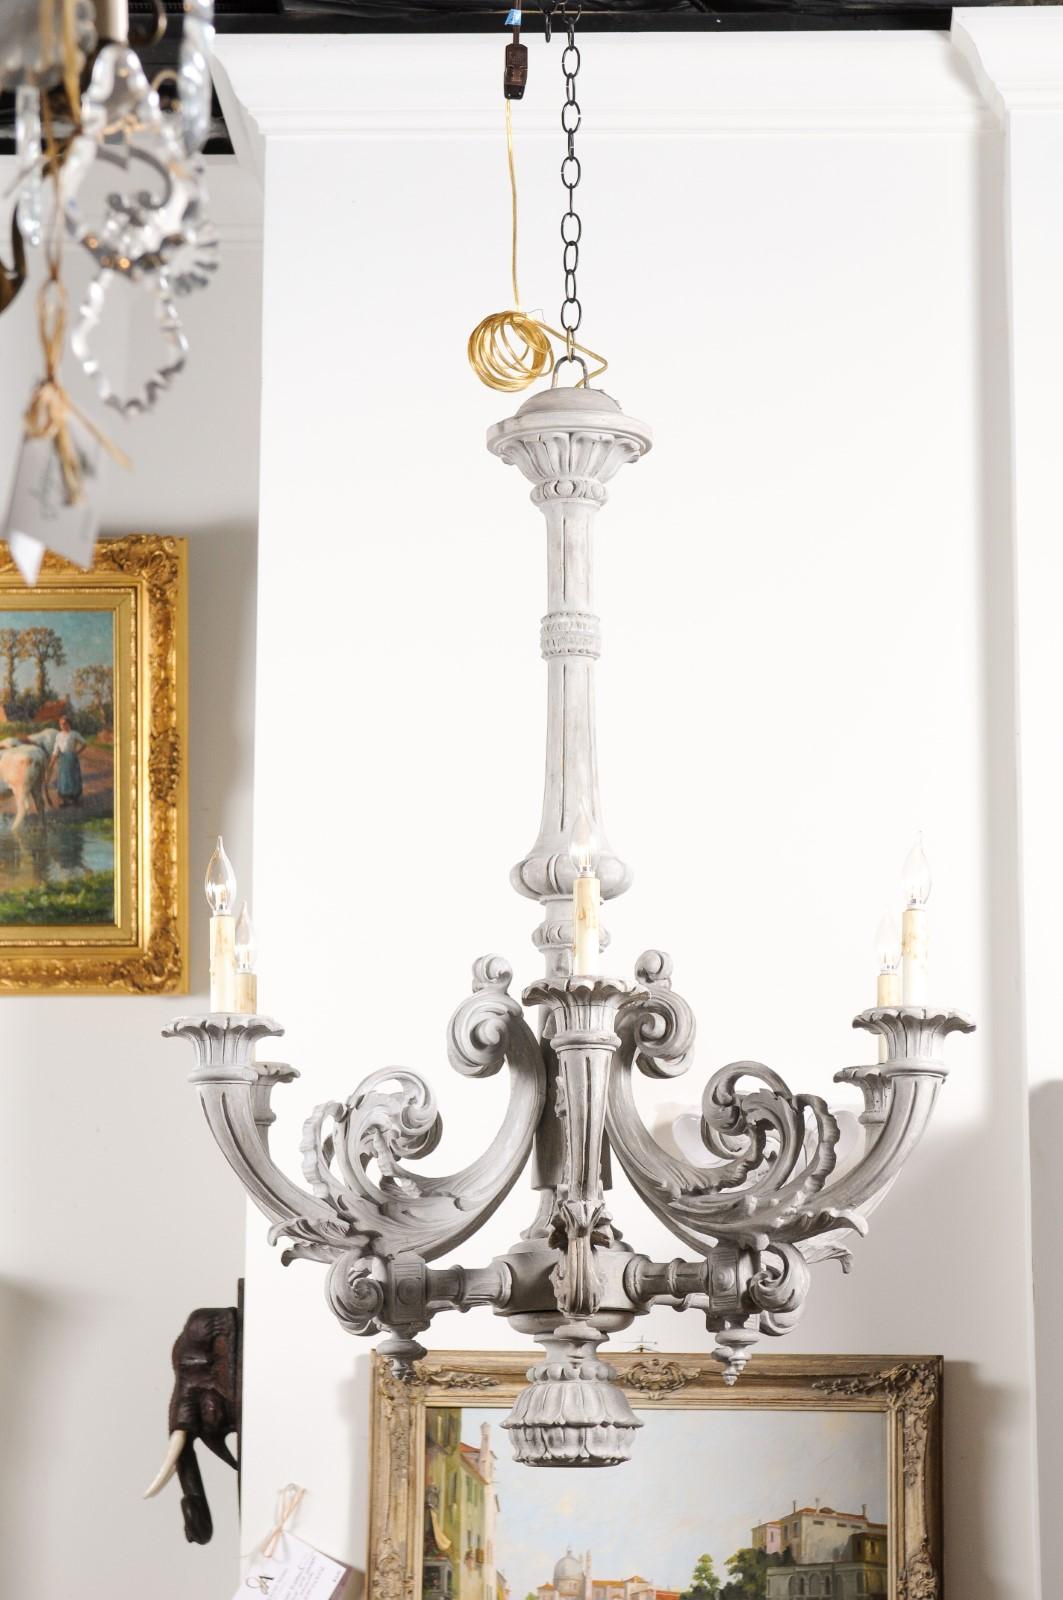 20th Century French Turn of the Century Painted Six-Light Chandelier with Scrolling Arms For Sale